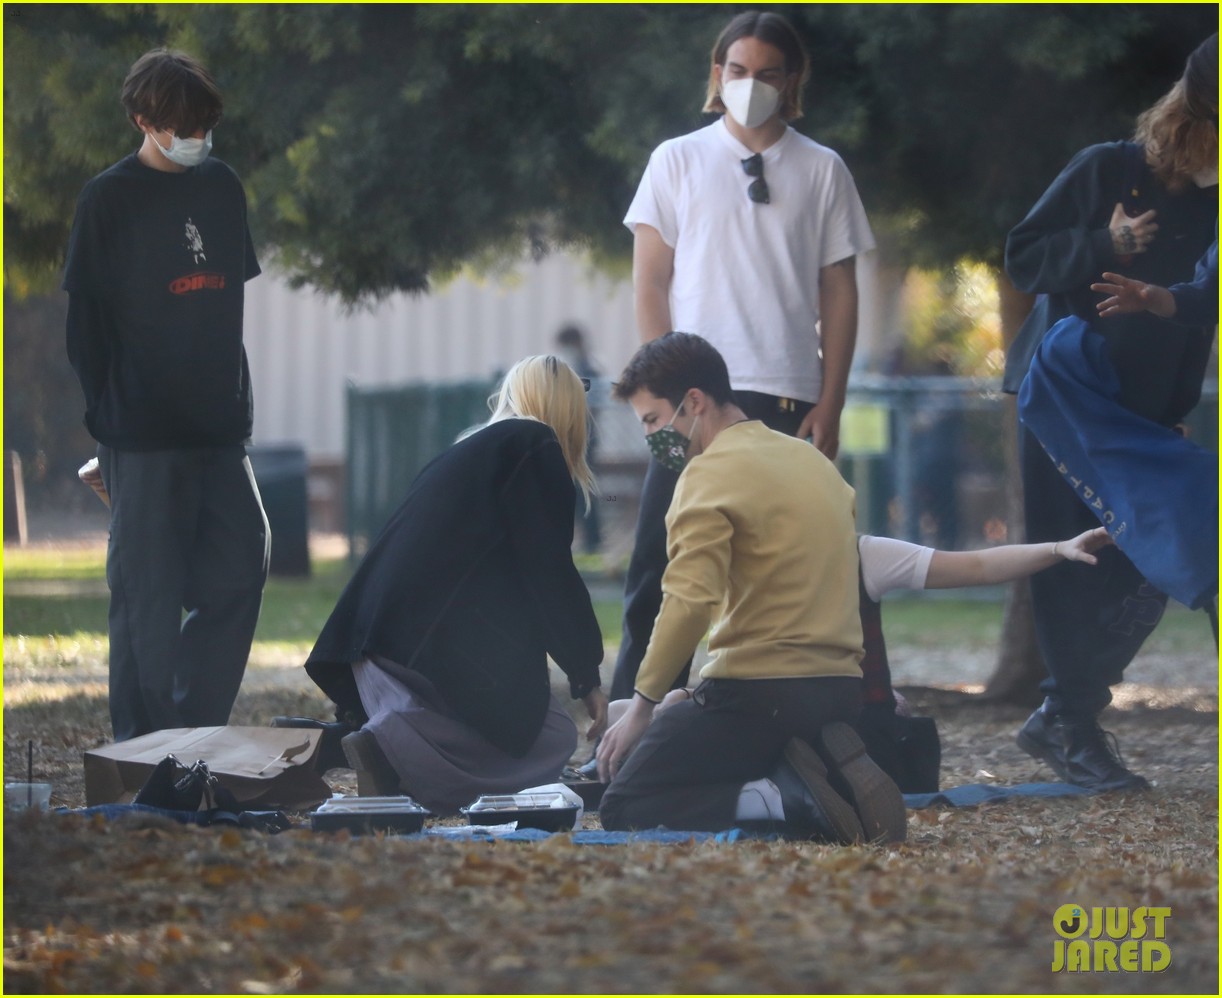 dylan minnette lydia night grab takeout for lunch in the park 03